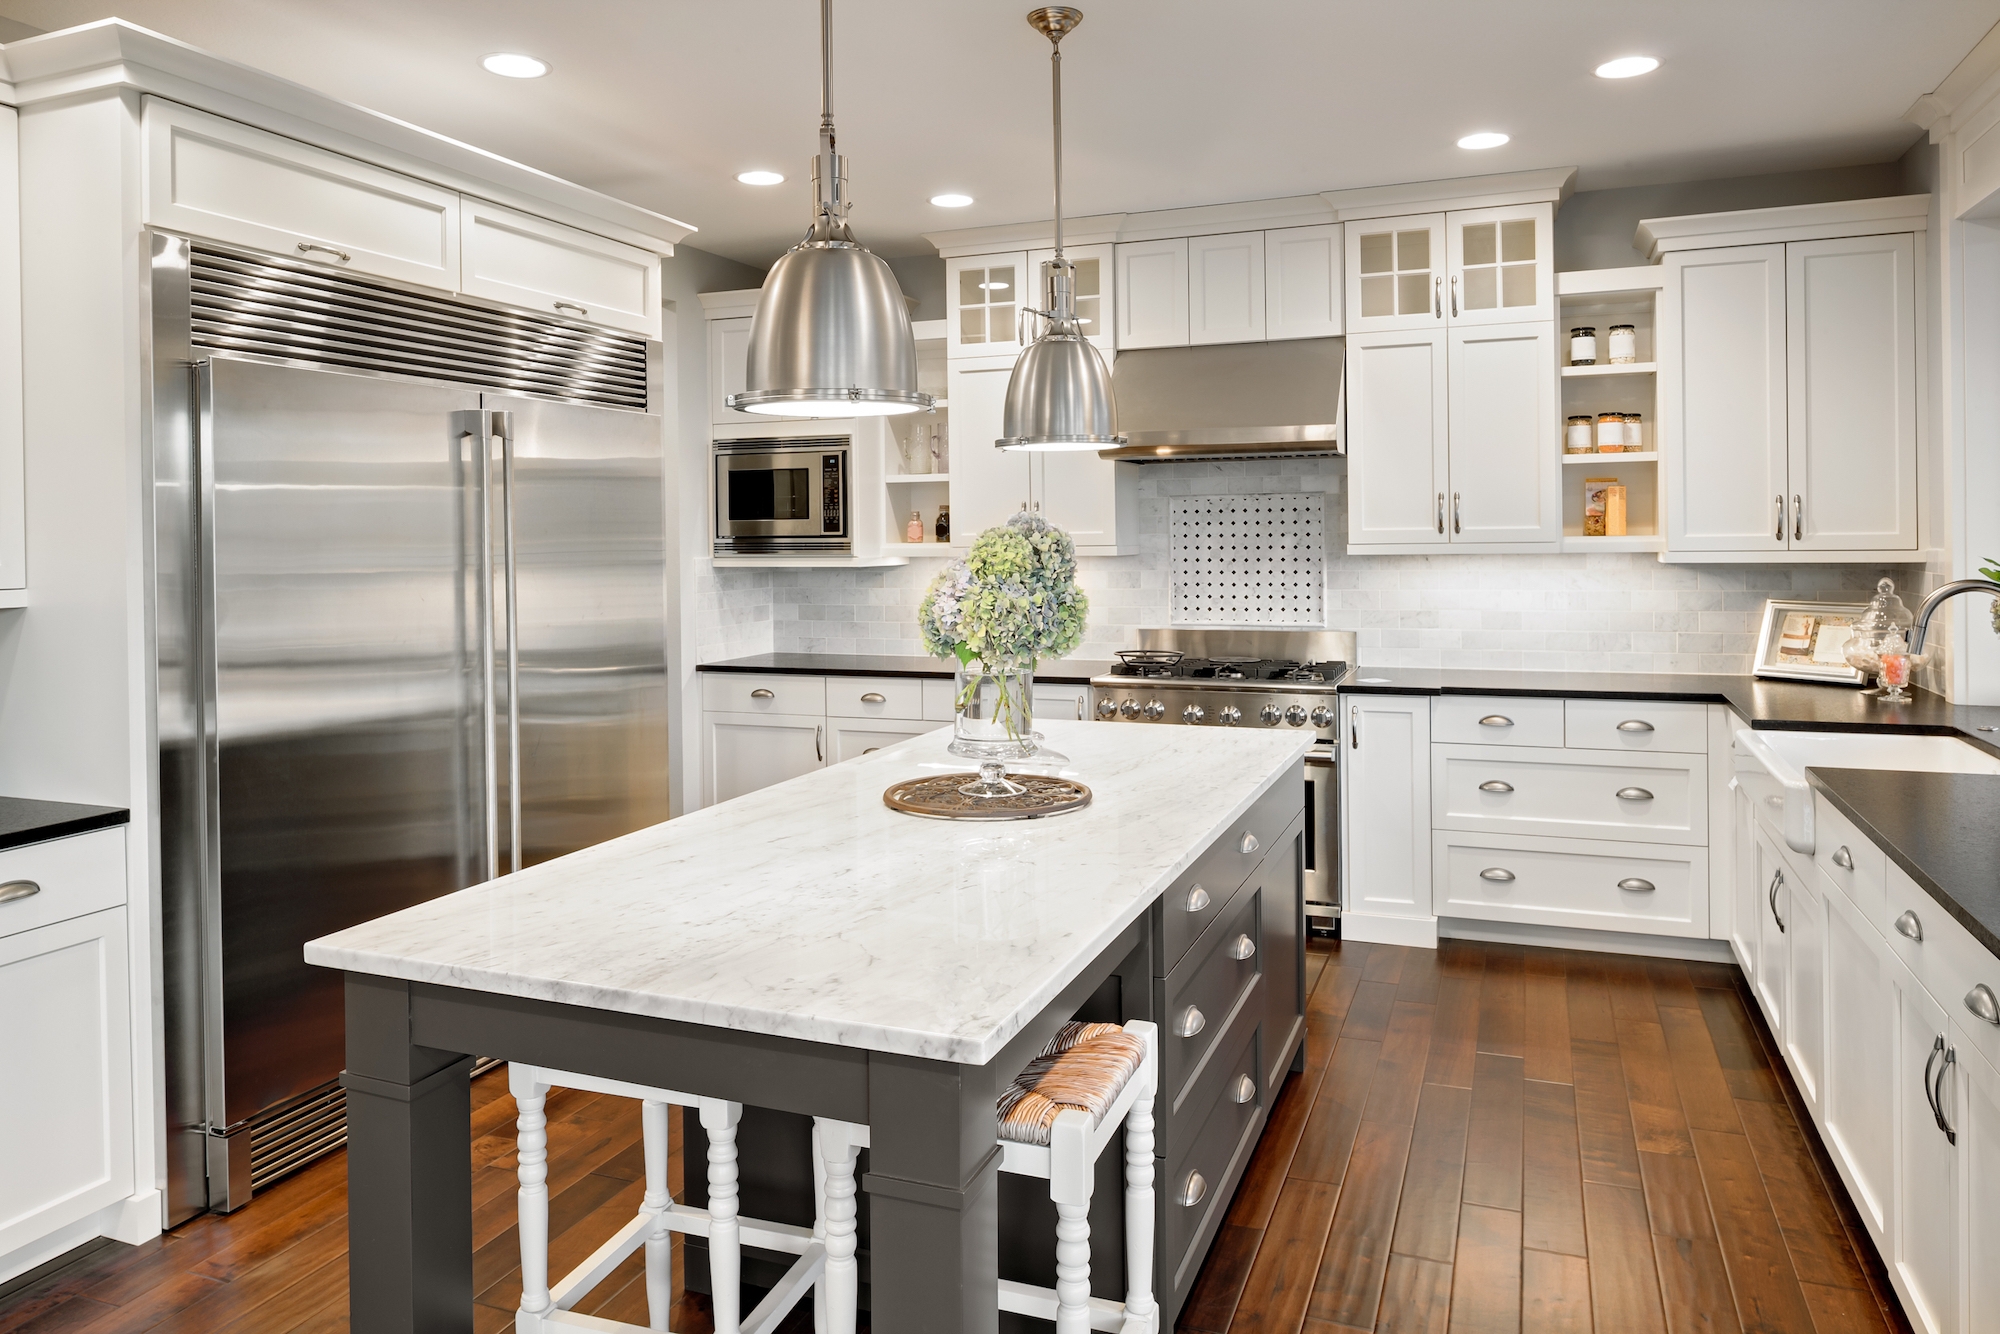 Elegant white cabinet kitchen with wood floors in a new jersey home remodel